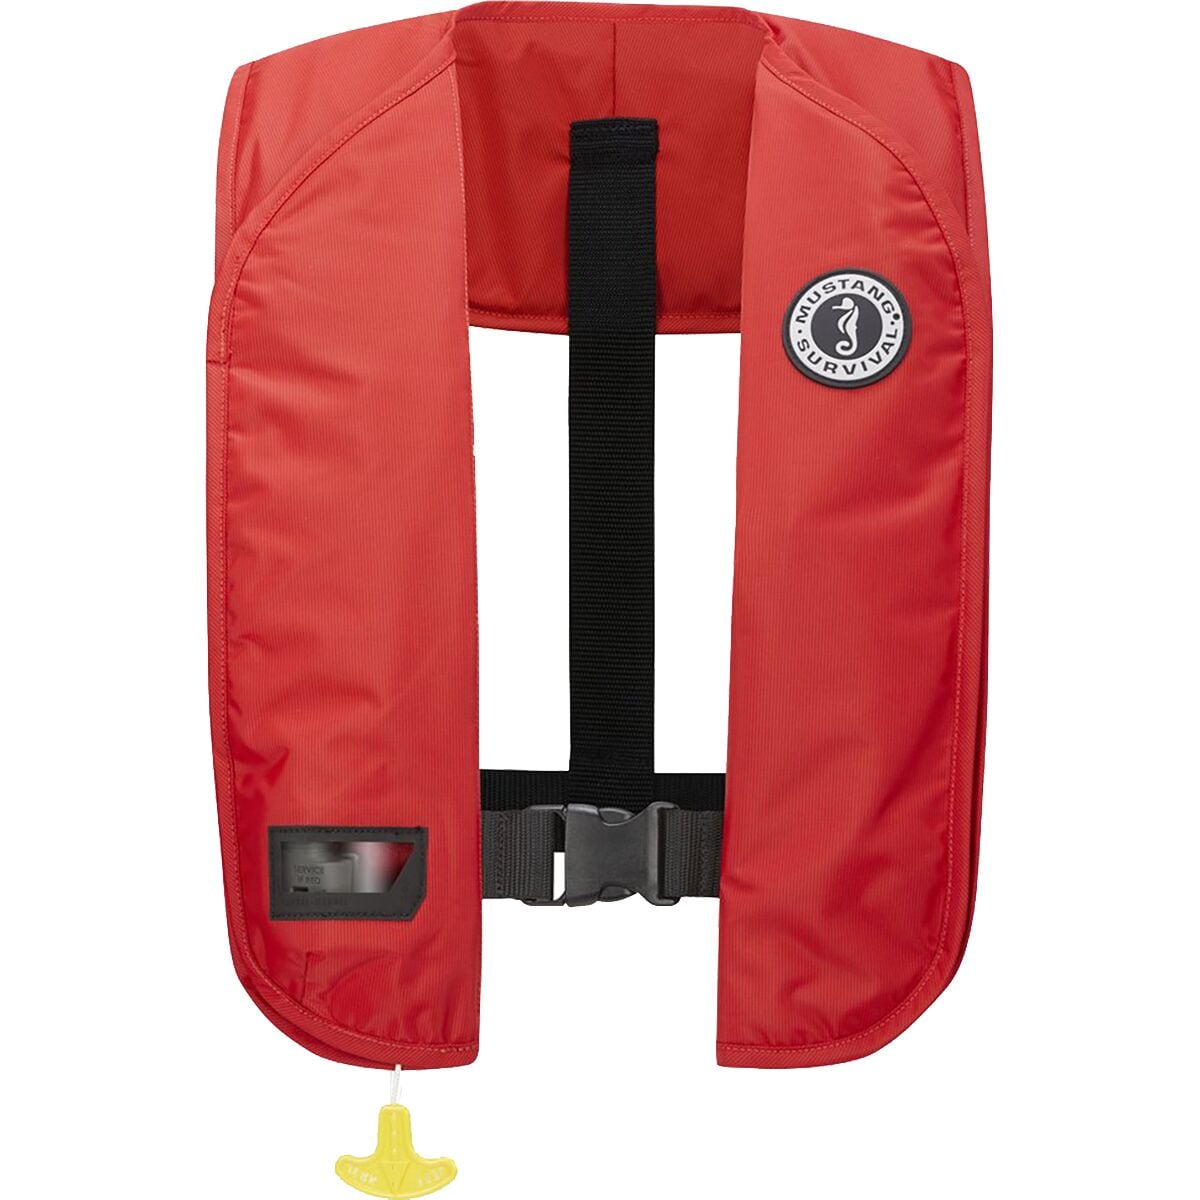 Mustang Survival M.I.T. 100 AA Inflatable Personal Flotation Device